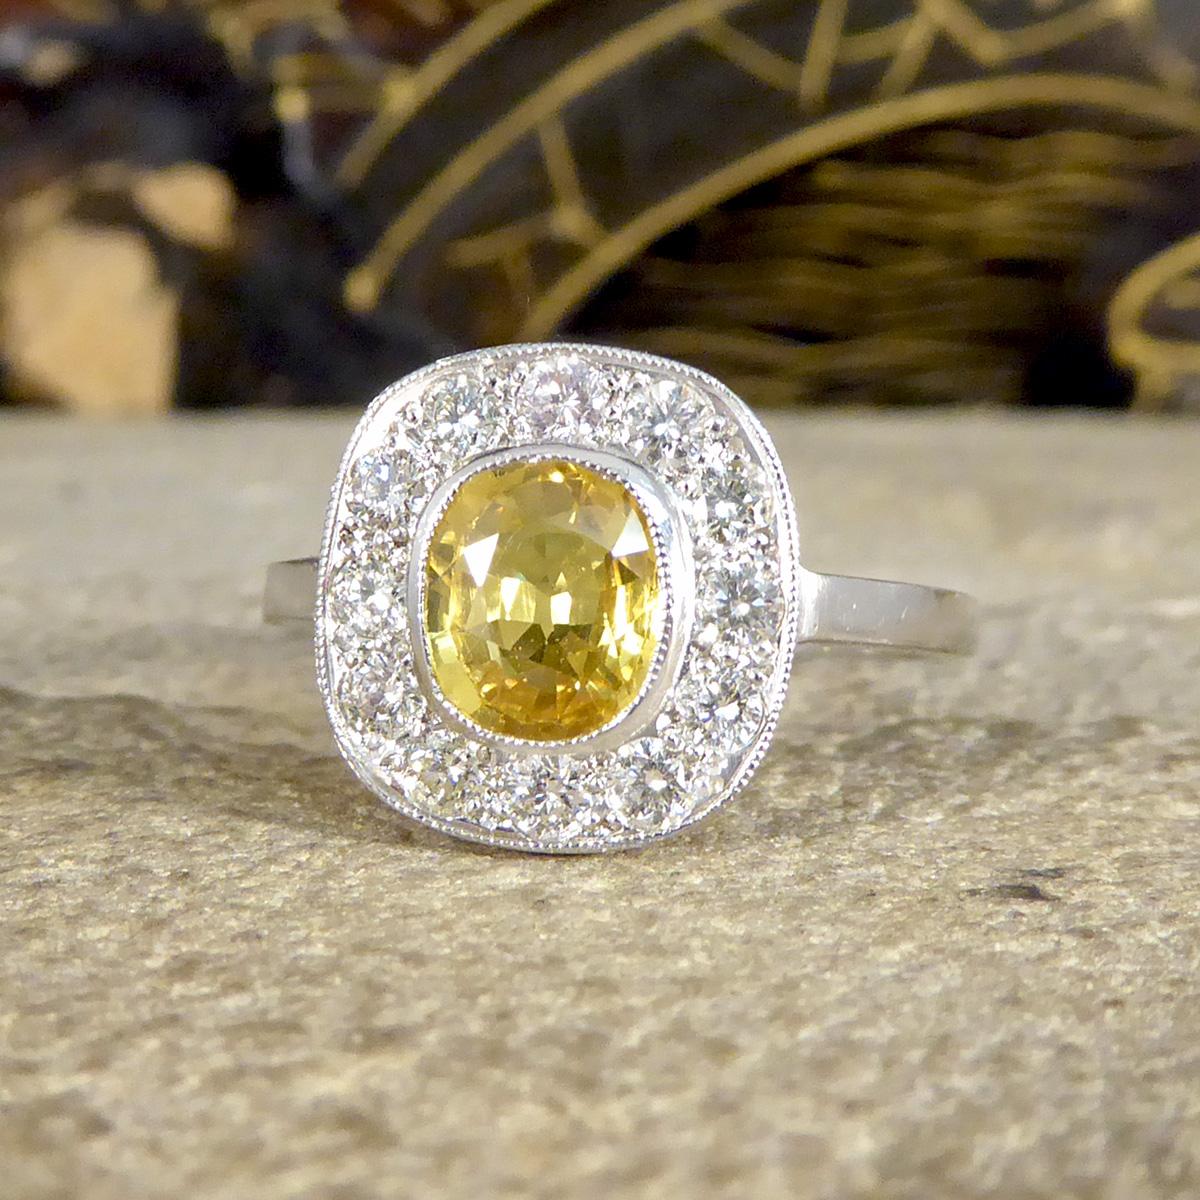 Contemporary 1.50 Carat Yellow Sapphire and Diamond Cluster Ring in Platinum In Excellent Condition For Sale In Yorkshire, West Yorkshire